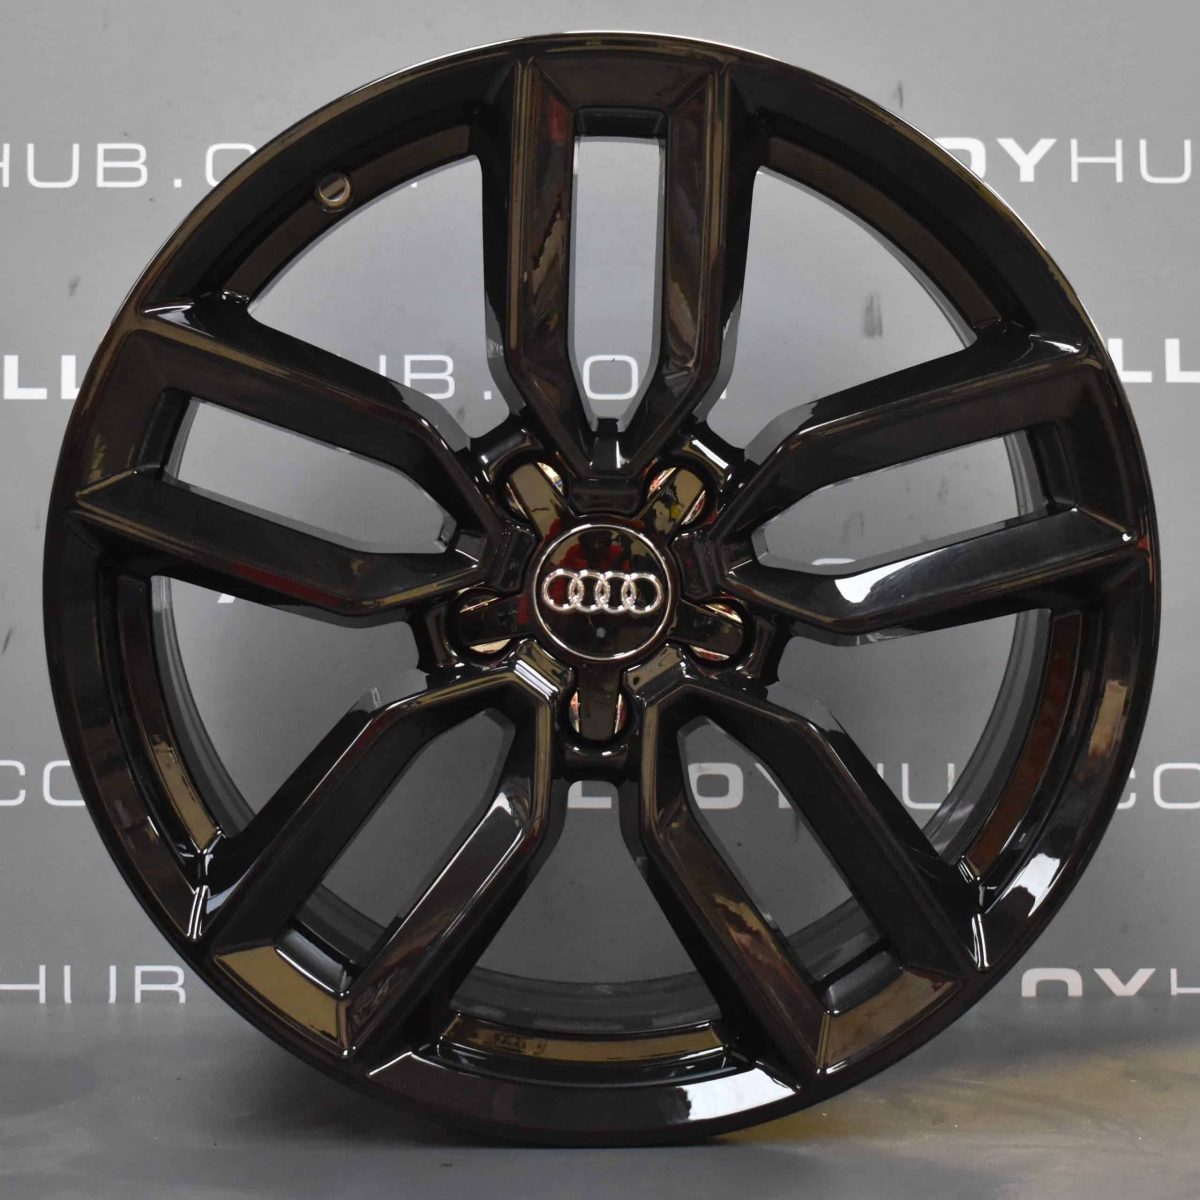 Genuine Audi S3 RS3 A3 8V 5 Twin Spoke 18" Inch Alloy Wheels with Gloss Black Finish 8V0 601 025 M